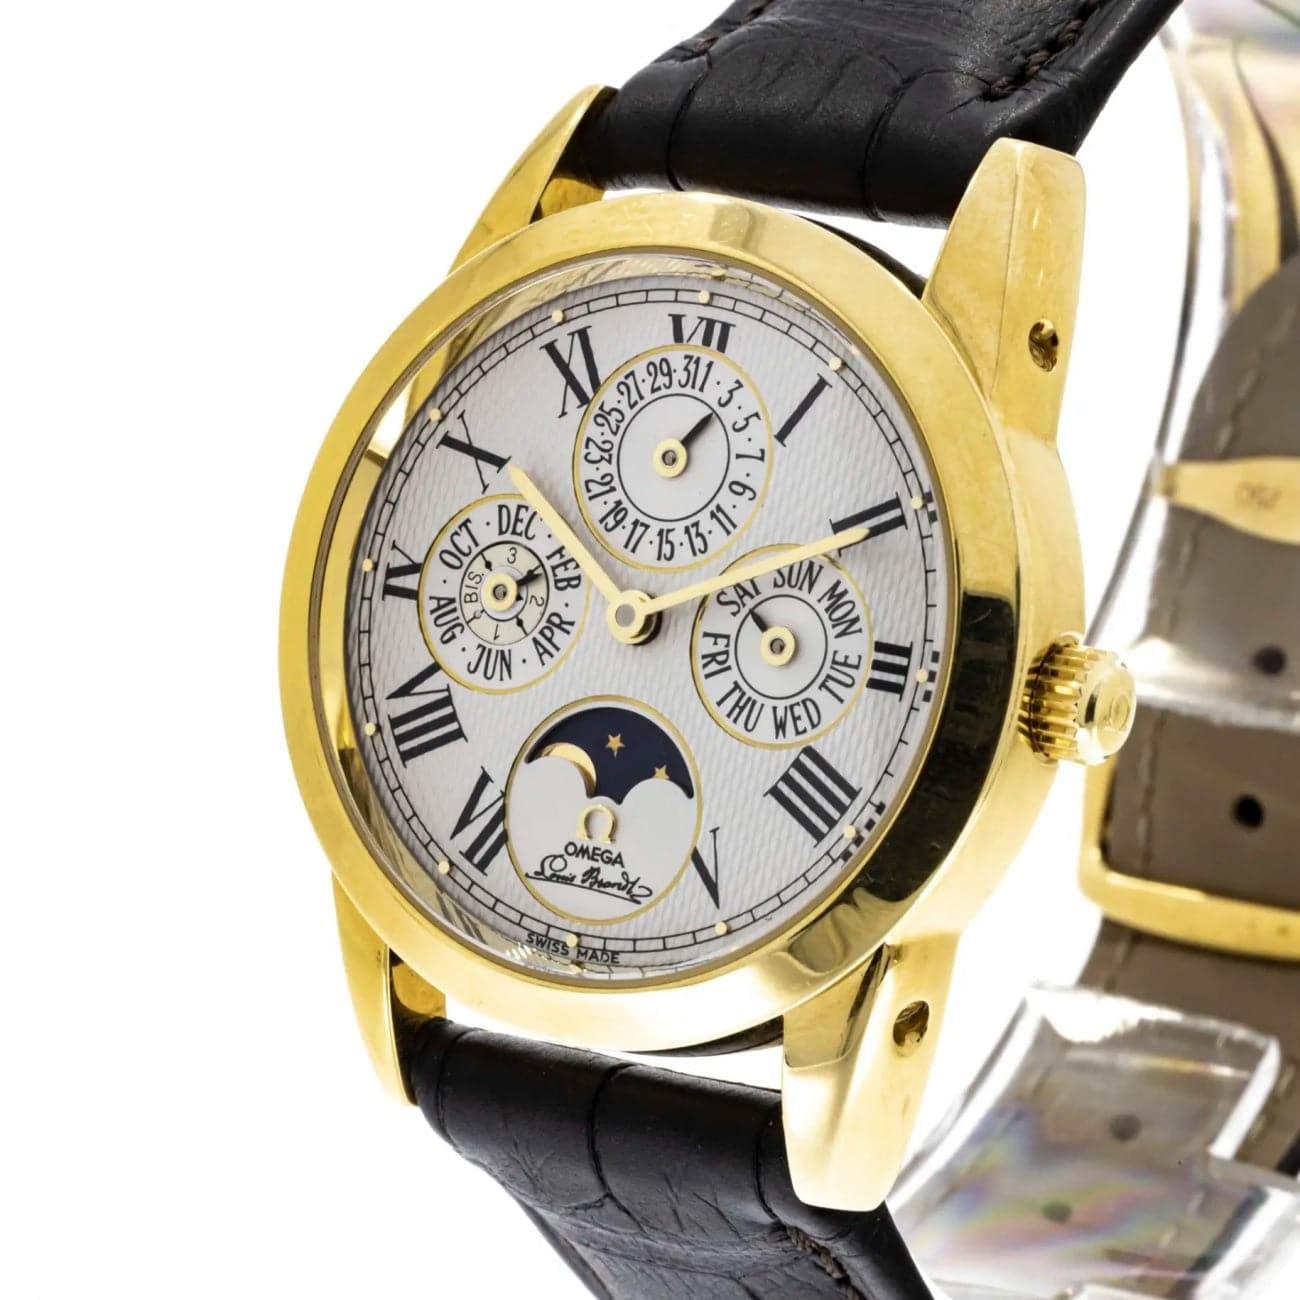 OMEGA LOUIS BRANDT YELLOW GOLD PERPETUAL CALENDAR Omega, Louis Brandt,  Quantième Perpétuel, Ref. 1750300, Made in 1991. Fine and rare,  self-winding, water-resistant, 18K yellow gold wristwatch with perpetual  calendar and moon phases